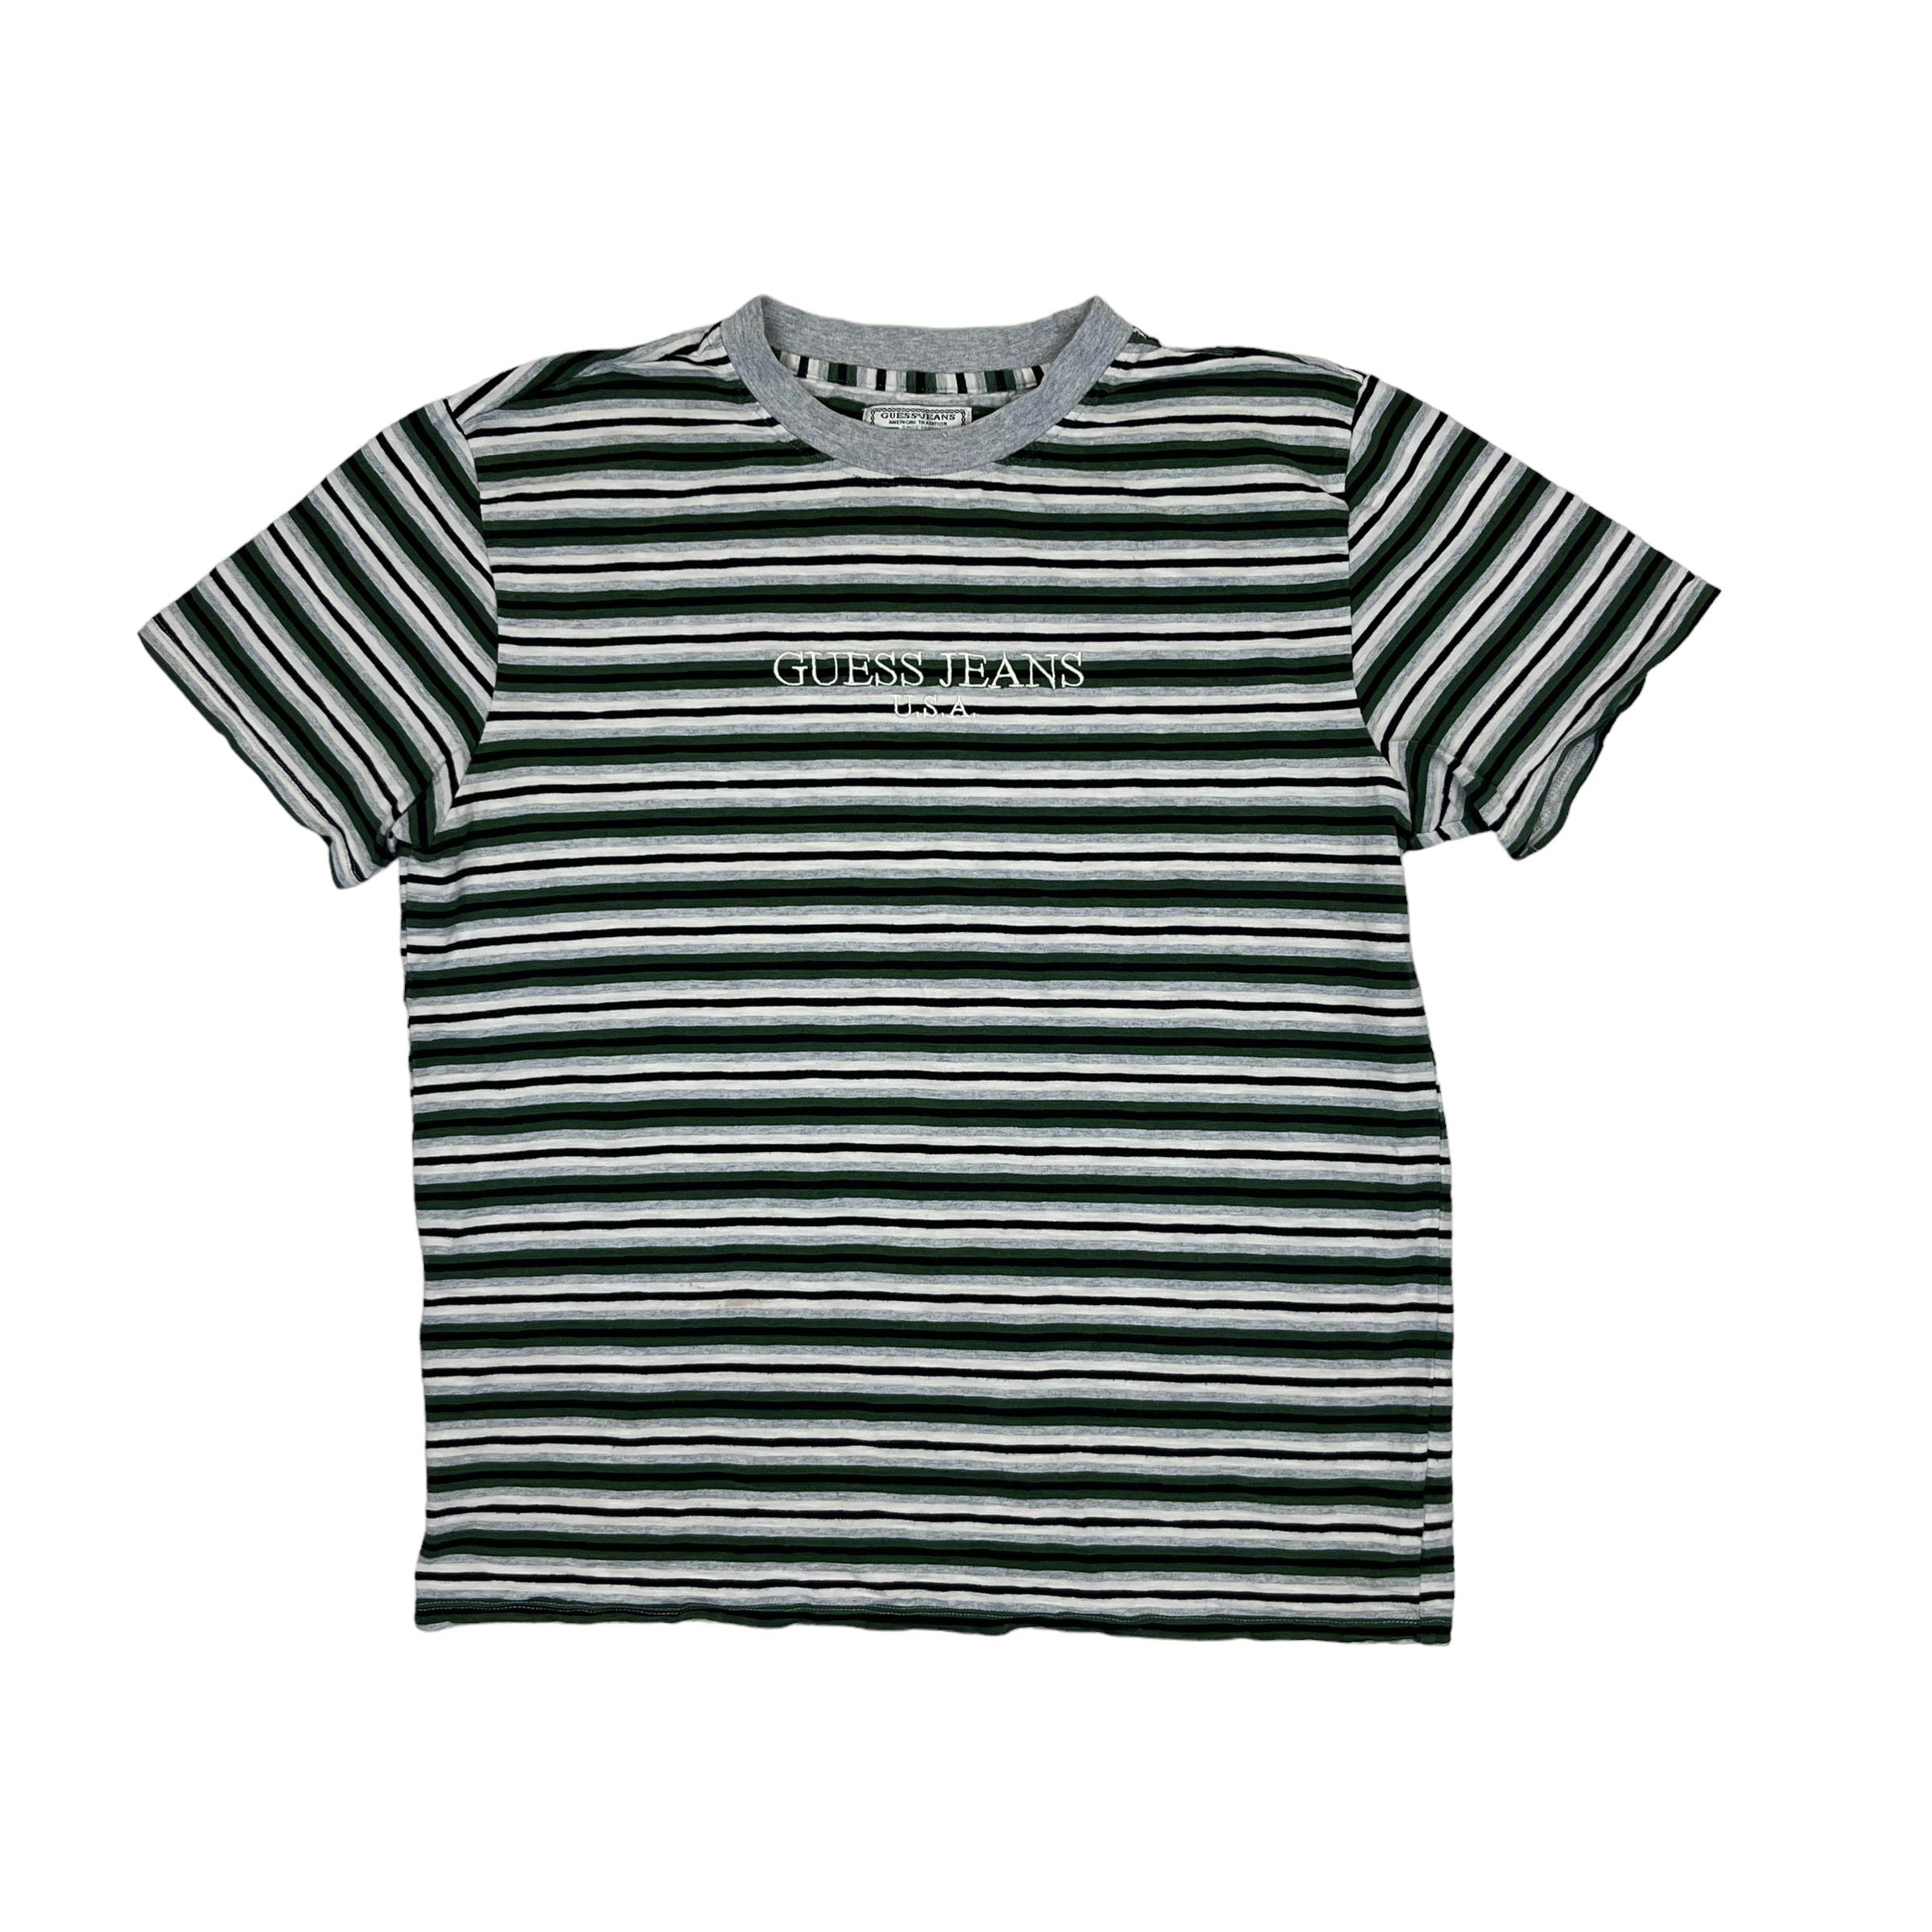 repræsentant september omfattende 00s) Guess Jeans USA Embroidered Green Striped T-Shirt – Soleply